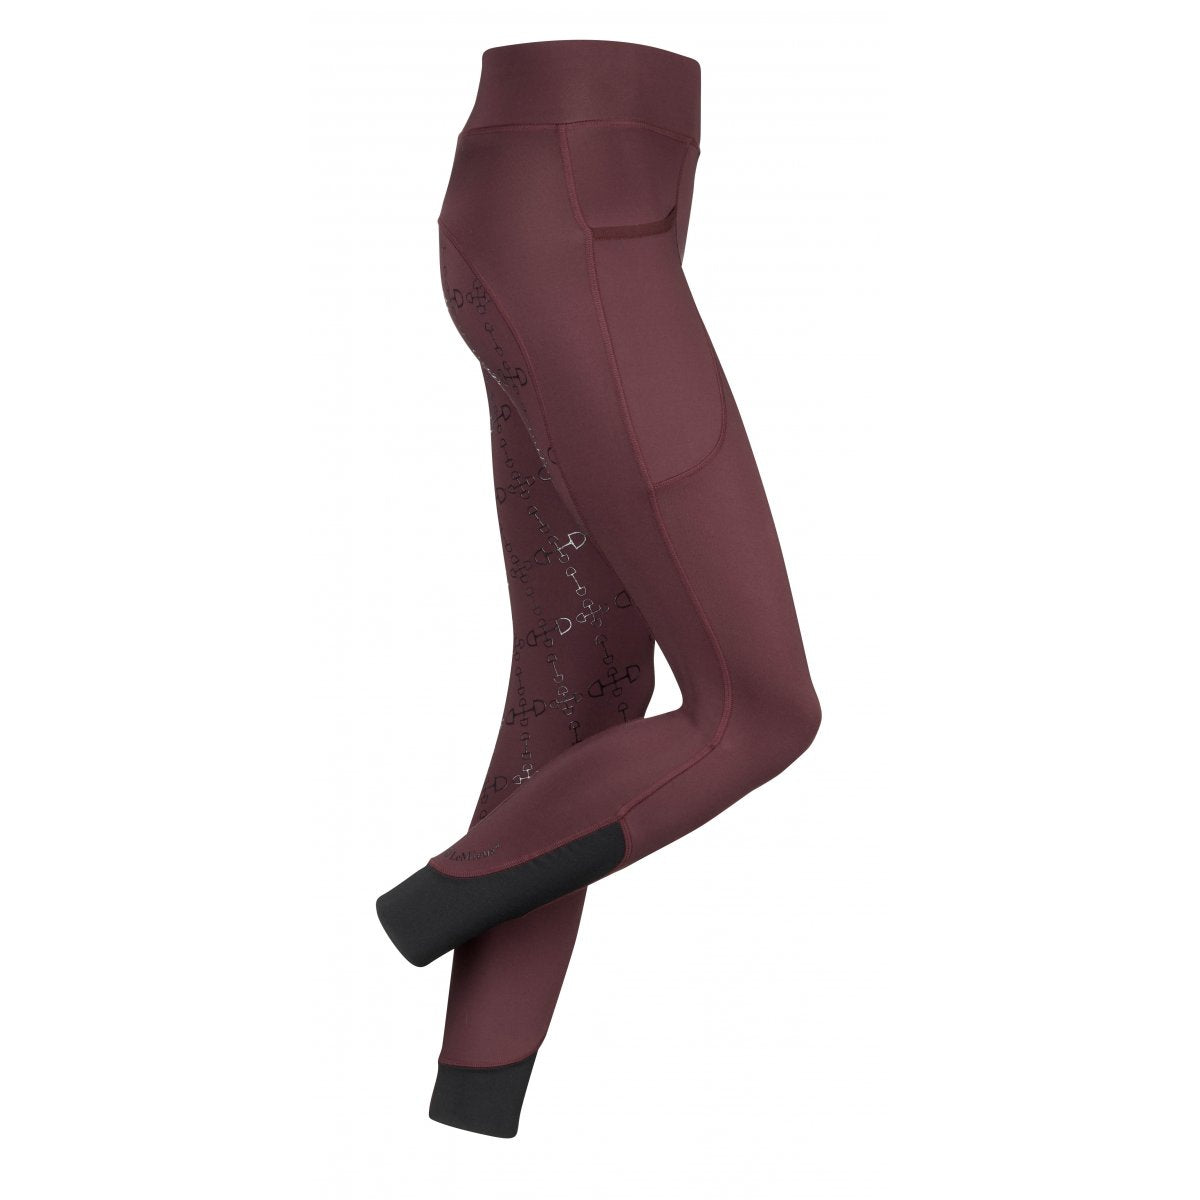 Burgundy horse riding tights with grip pattern on inner leg.